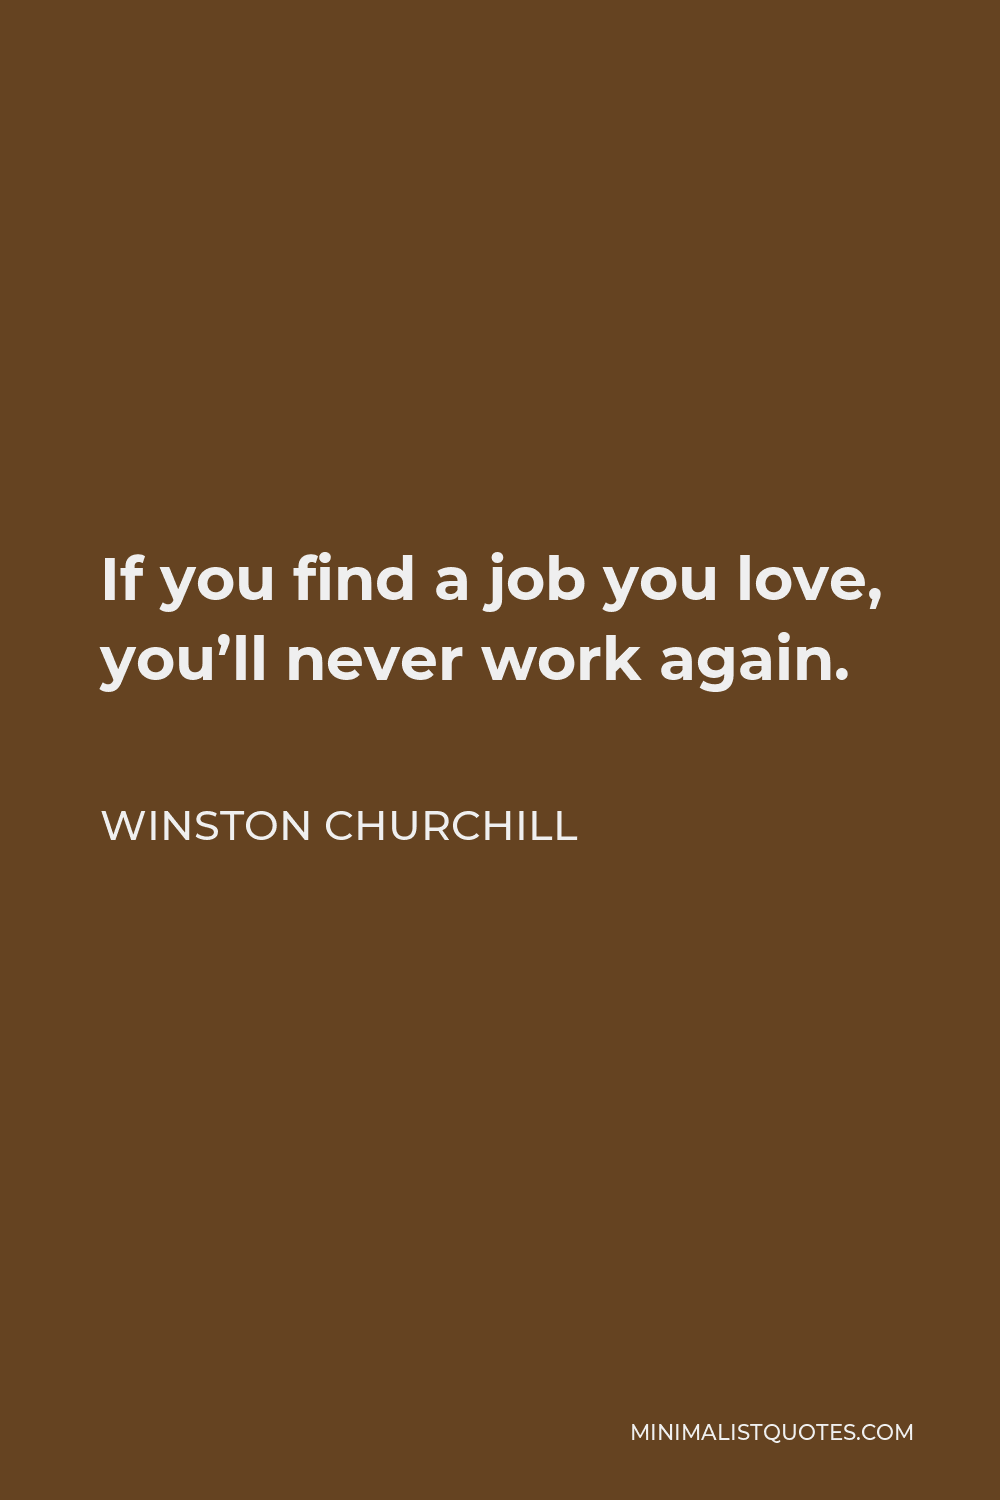 Winston Churchill Quote - If you find a job you love, you’ll never work again.